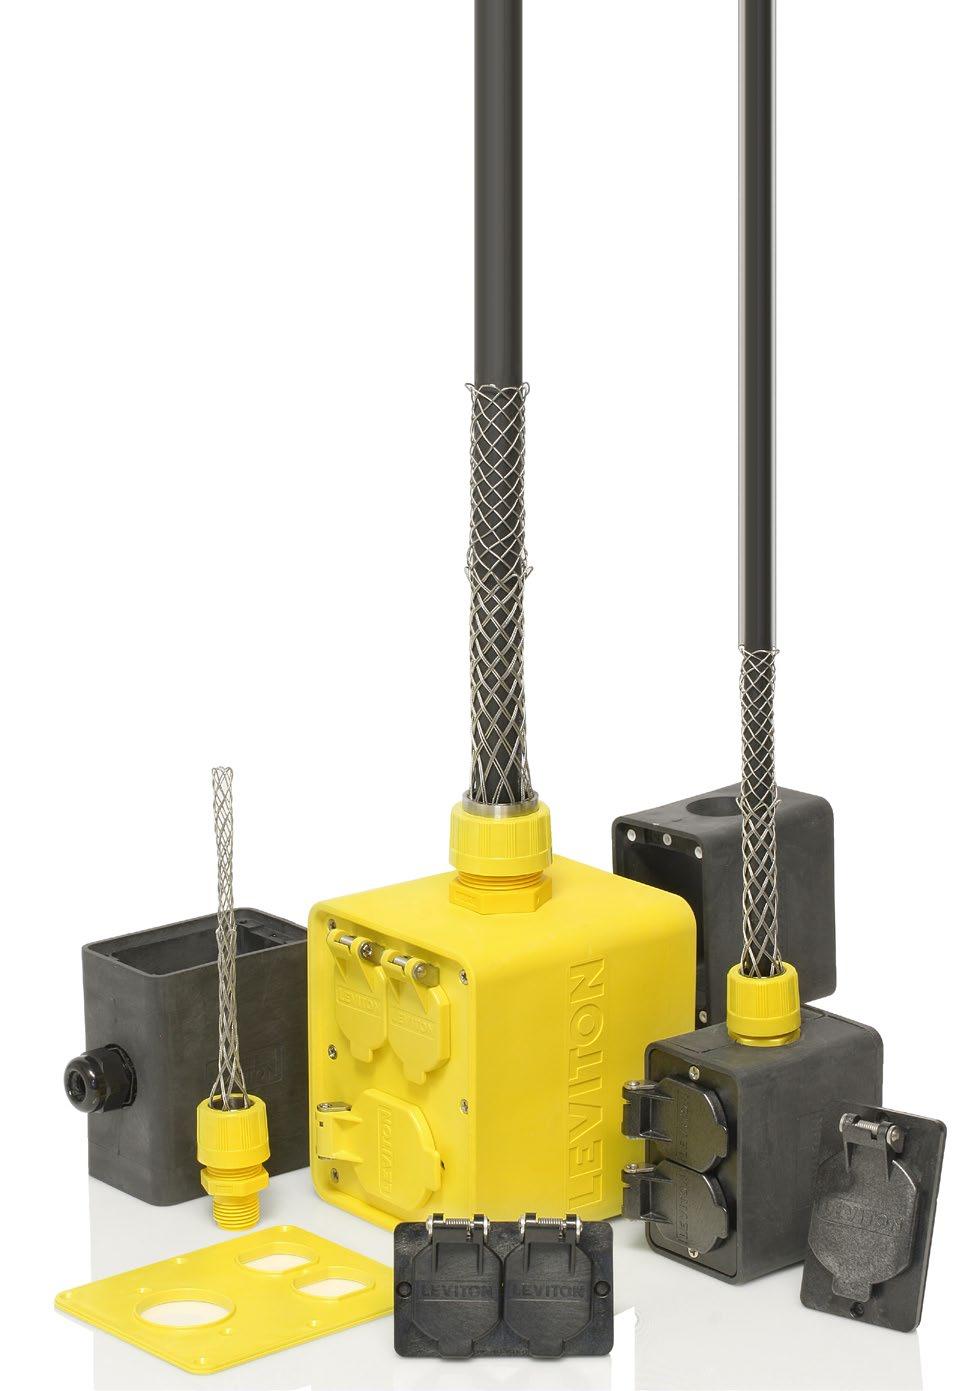 Product Bulletin Industrial Grade Portable Outlet Boxes, Wire Mesh Grips & Coverplates Portable Electrical Outlet Boxes from Leviton are the perfect solution for creating